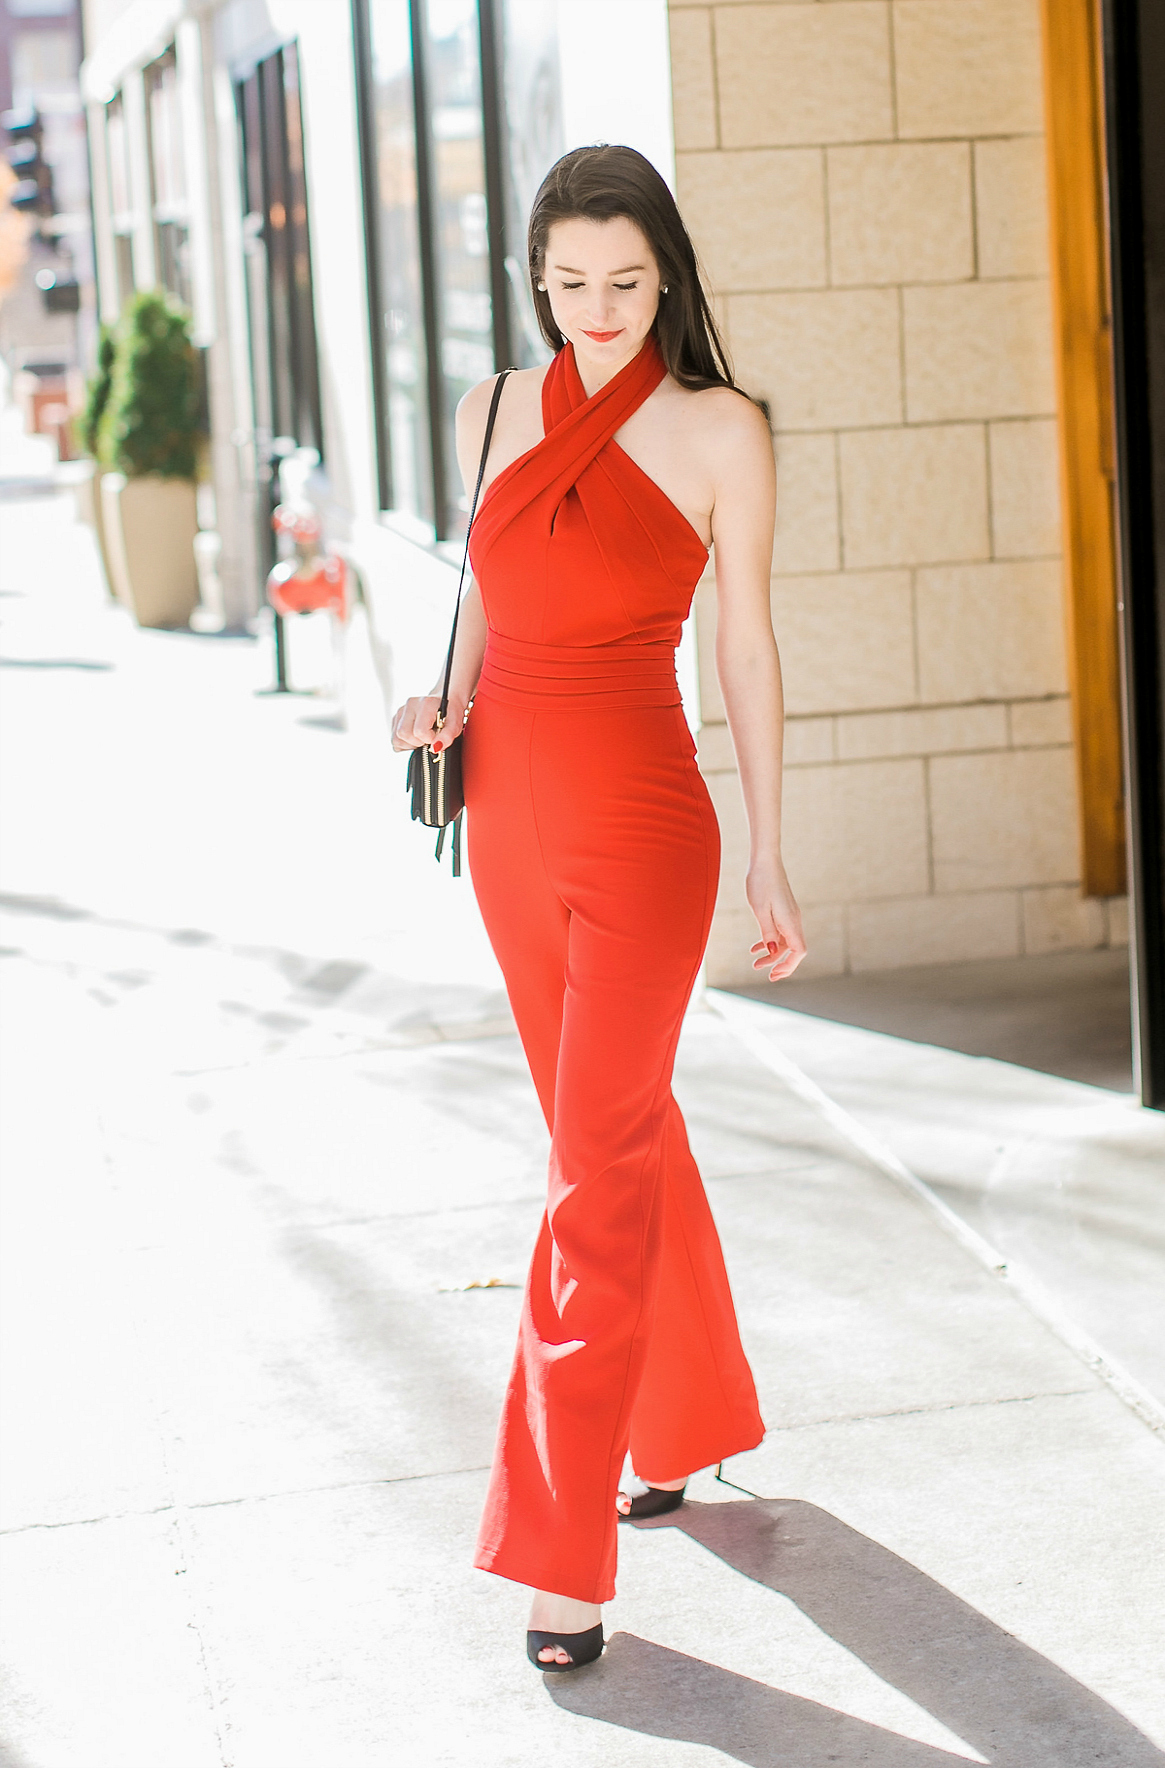 Blogger Stephanie Ziajka shows how to wear a jumpsuit to a holiday work party on Diary of a Debutante